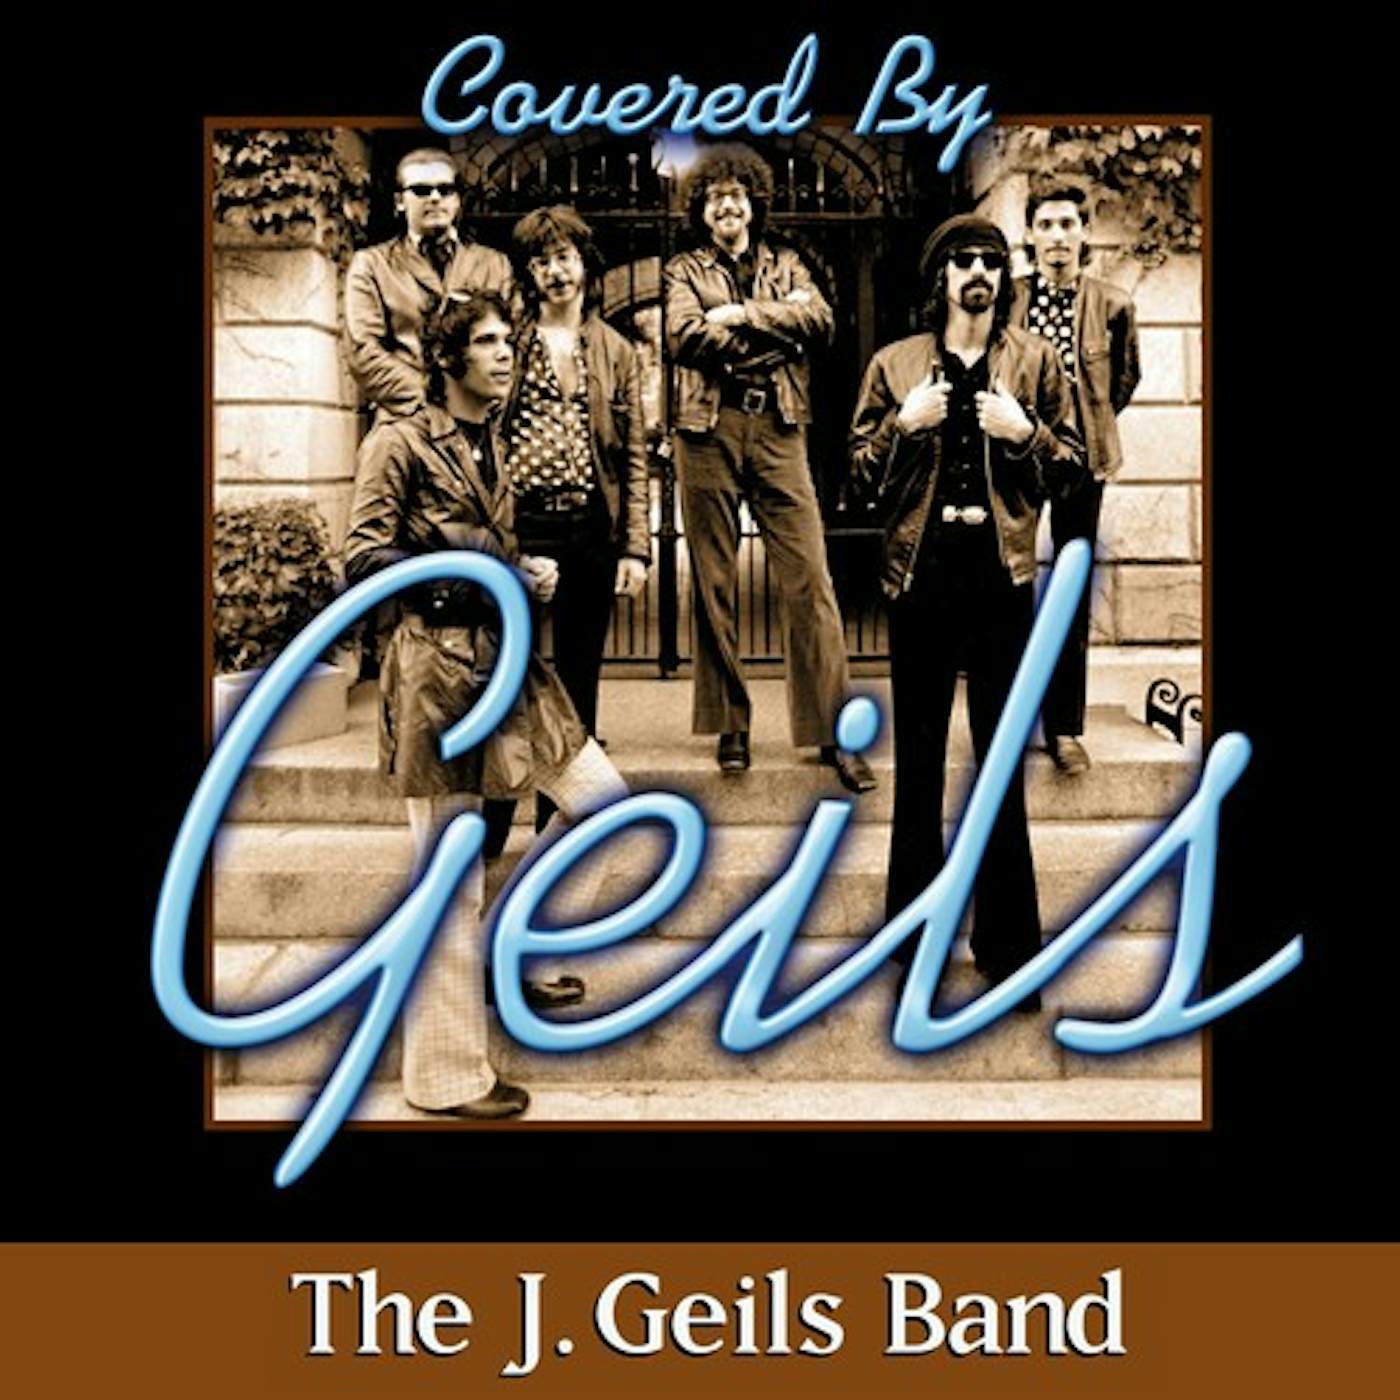 The J. Geils Band COVERED BY GEILS CD